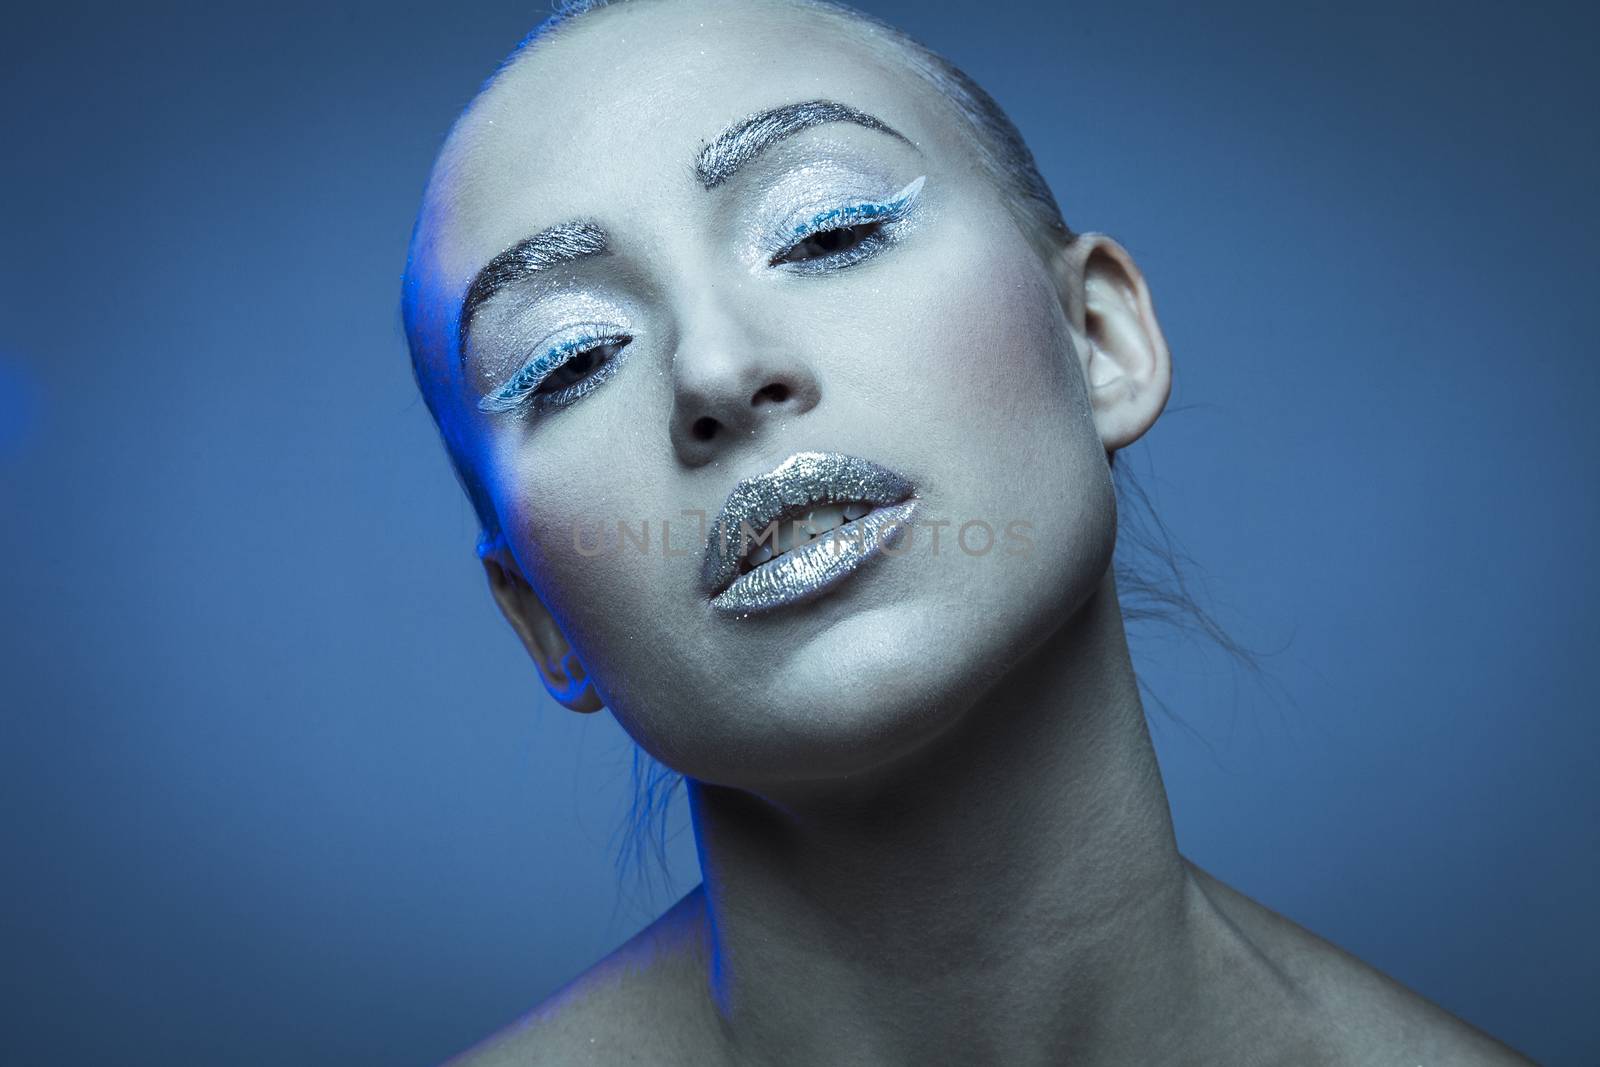 Portraits of a young fashion model as ice queen.